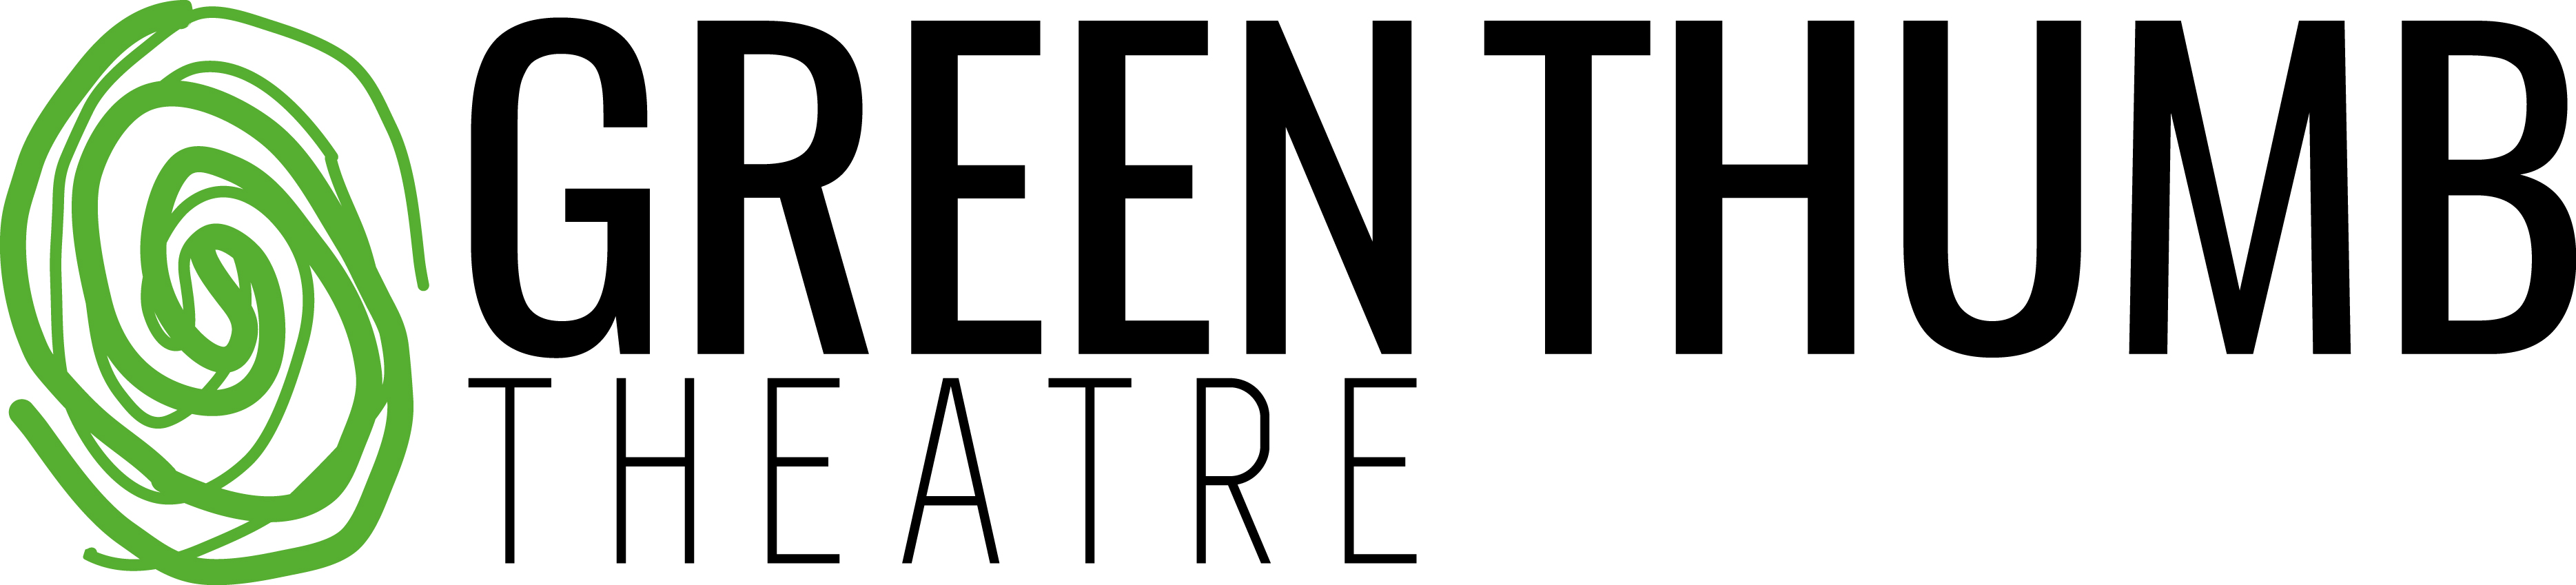 Green Thumb Theatre logo - to the left of the wordmark there is a green thumbprint.